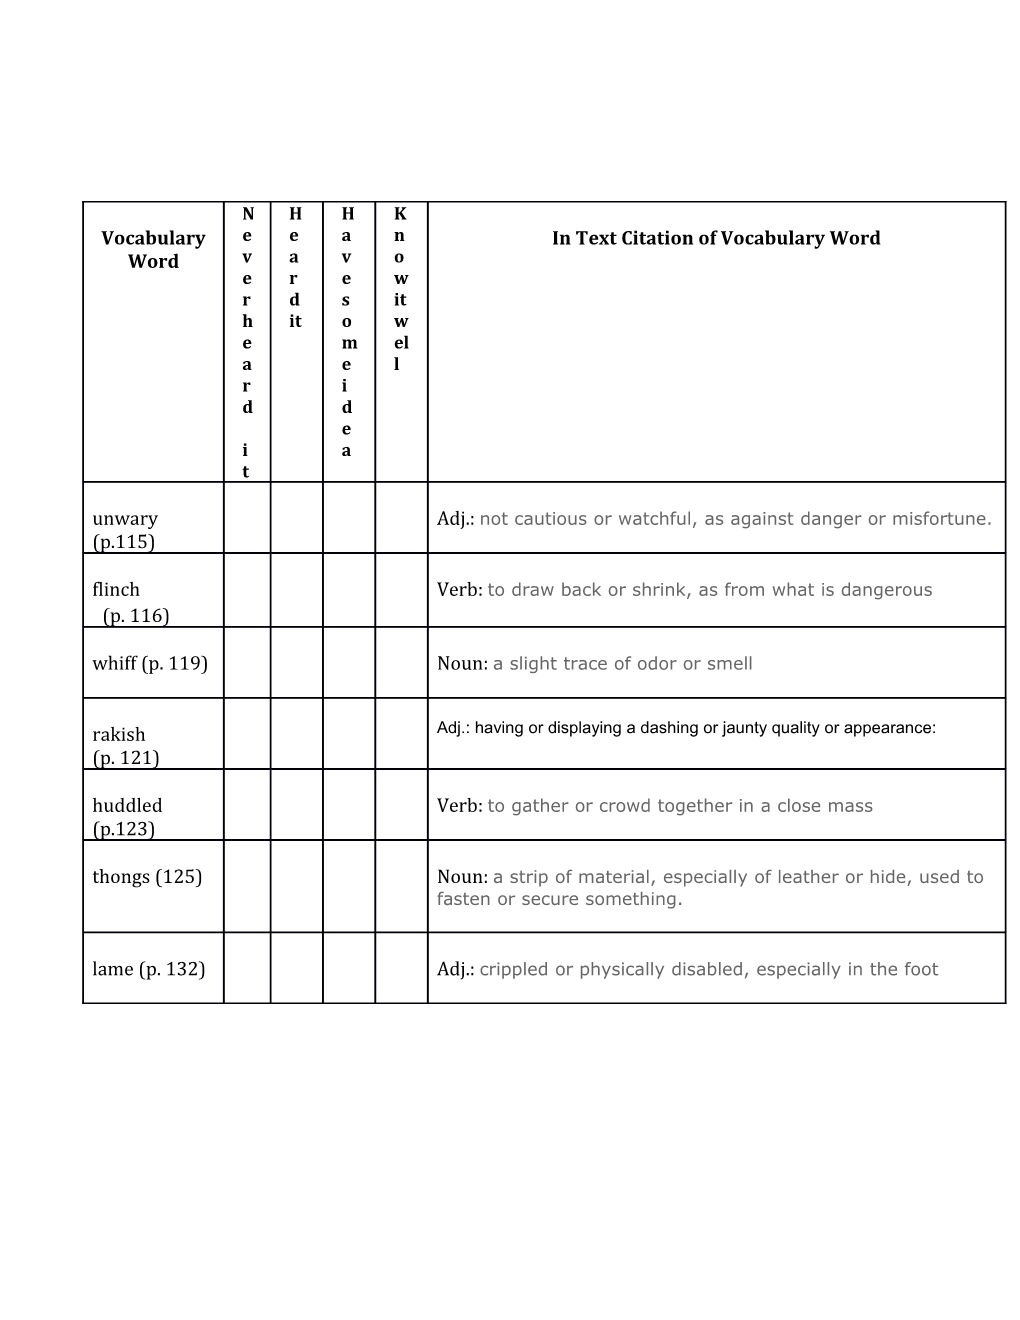 Answer Key VOCABULARY KNOWLEDGE RATING (VKR) Name: ______